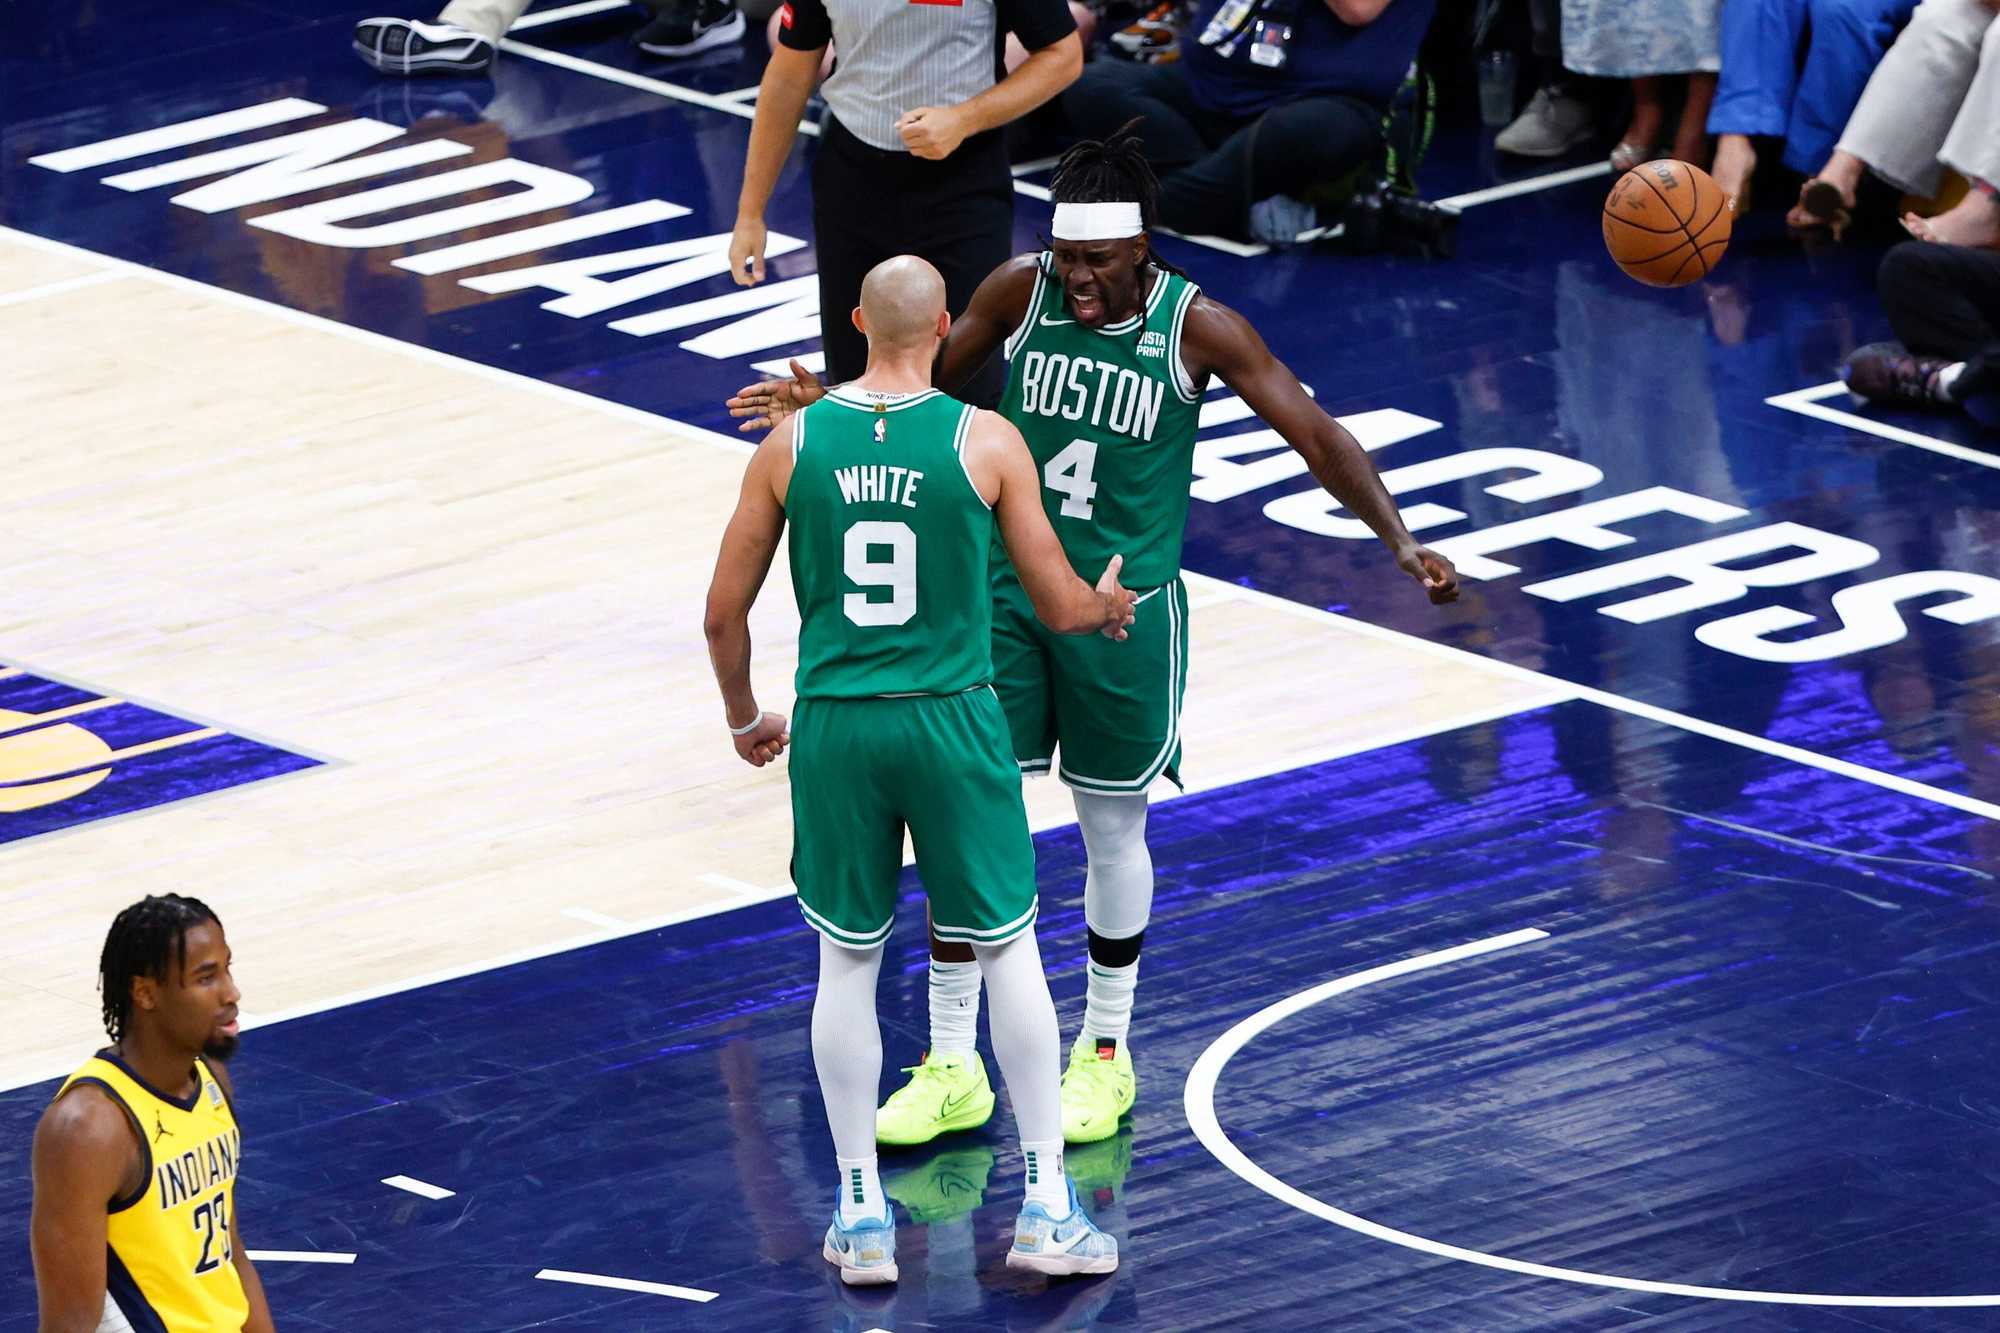 Derrick White and Jrue Holiday are key components of this Celtics team, not simple role players.